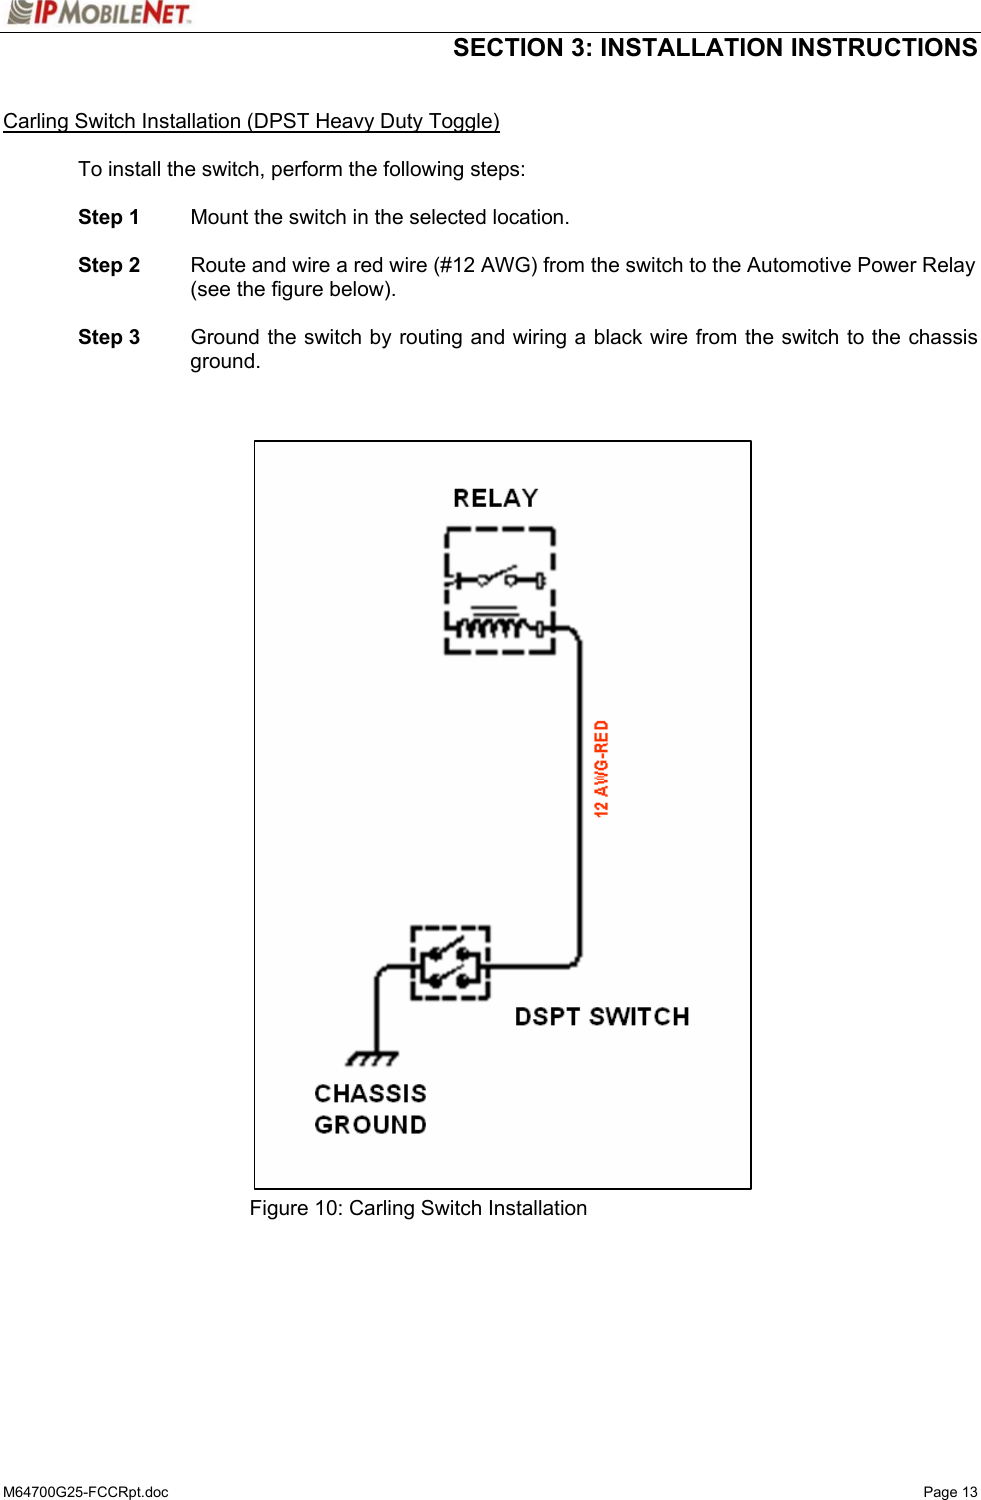  SECTION 3: INSTALLATION INSTRUCTIONS  M64700G25-FCCRpt.doc   Page 13  Carling Switch Installation (DPST Heavy Duty Toggle)  To install the switch, perform the following steps:   Step 1  Mount the switch in the selected location.   Step 2  Route and wire a red wire (#12 AWG) from the switch to the Automotive Power Relay (see the figure below).   Step 3    Ground the switch by routing and wiring a black wire from the switch to the chassis ground.                                    Figure 10: Carling Switch Installation   